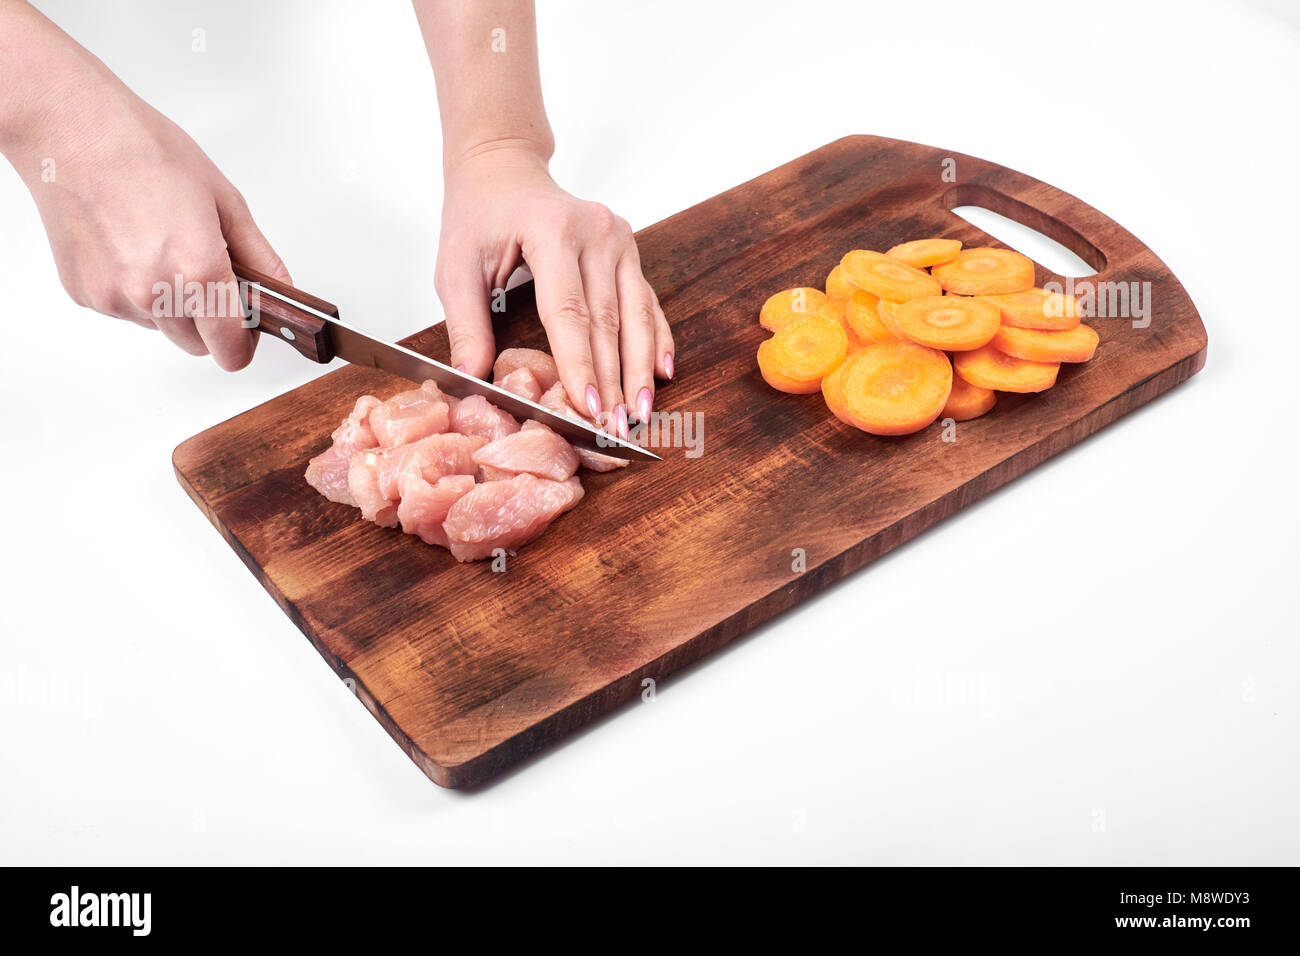 Cutting raw turkey meat and carrot with a kitchen knife on a cutting board isolated on white background Stock Photo